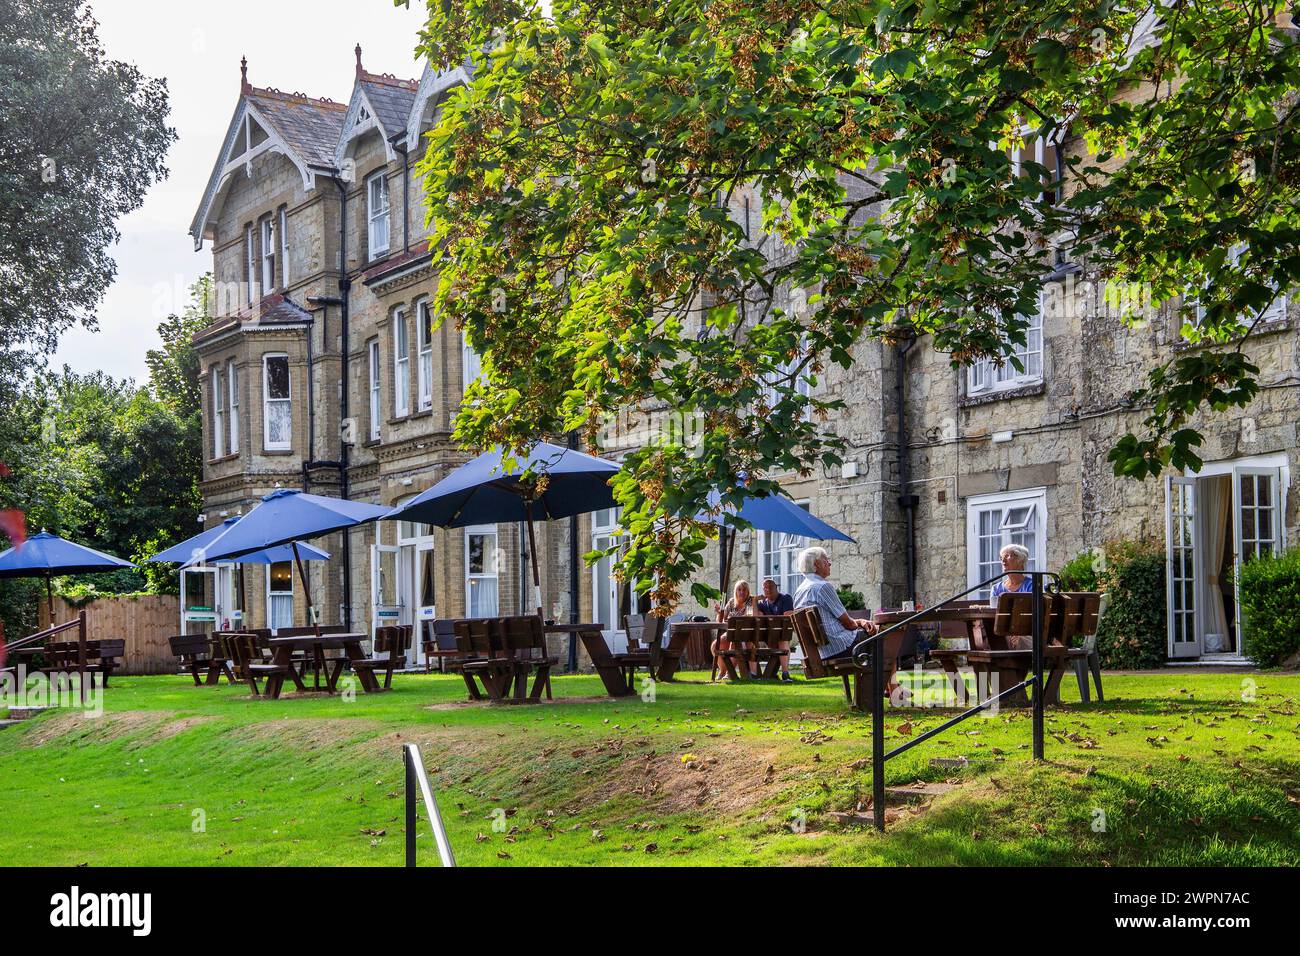 Historic Daish`s Hotel with terrace in the Old Village of Shanklin, Isle of Wight, Hampshire, Great Britain, England Stock Photo